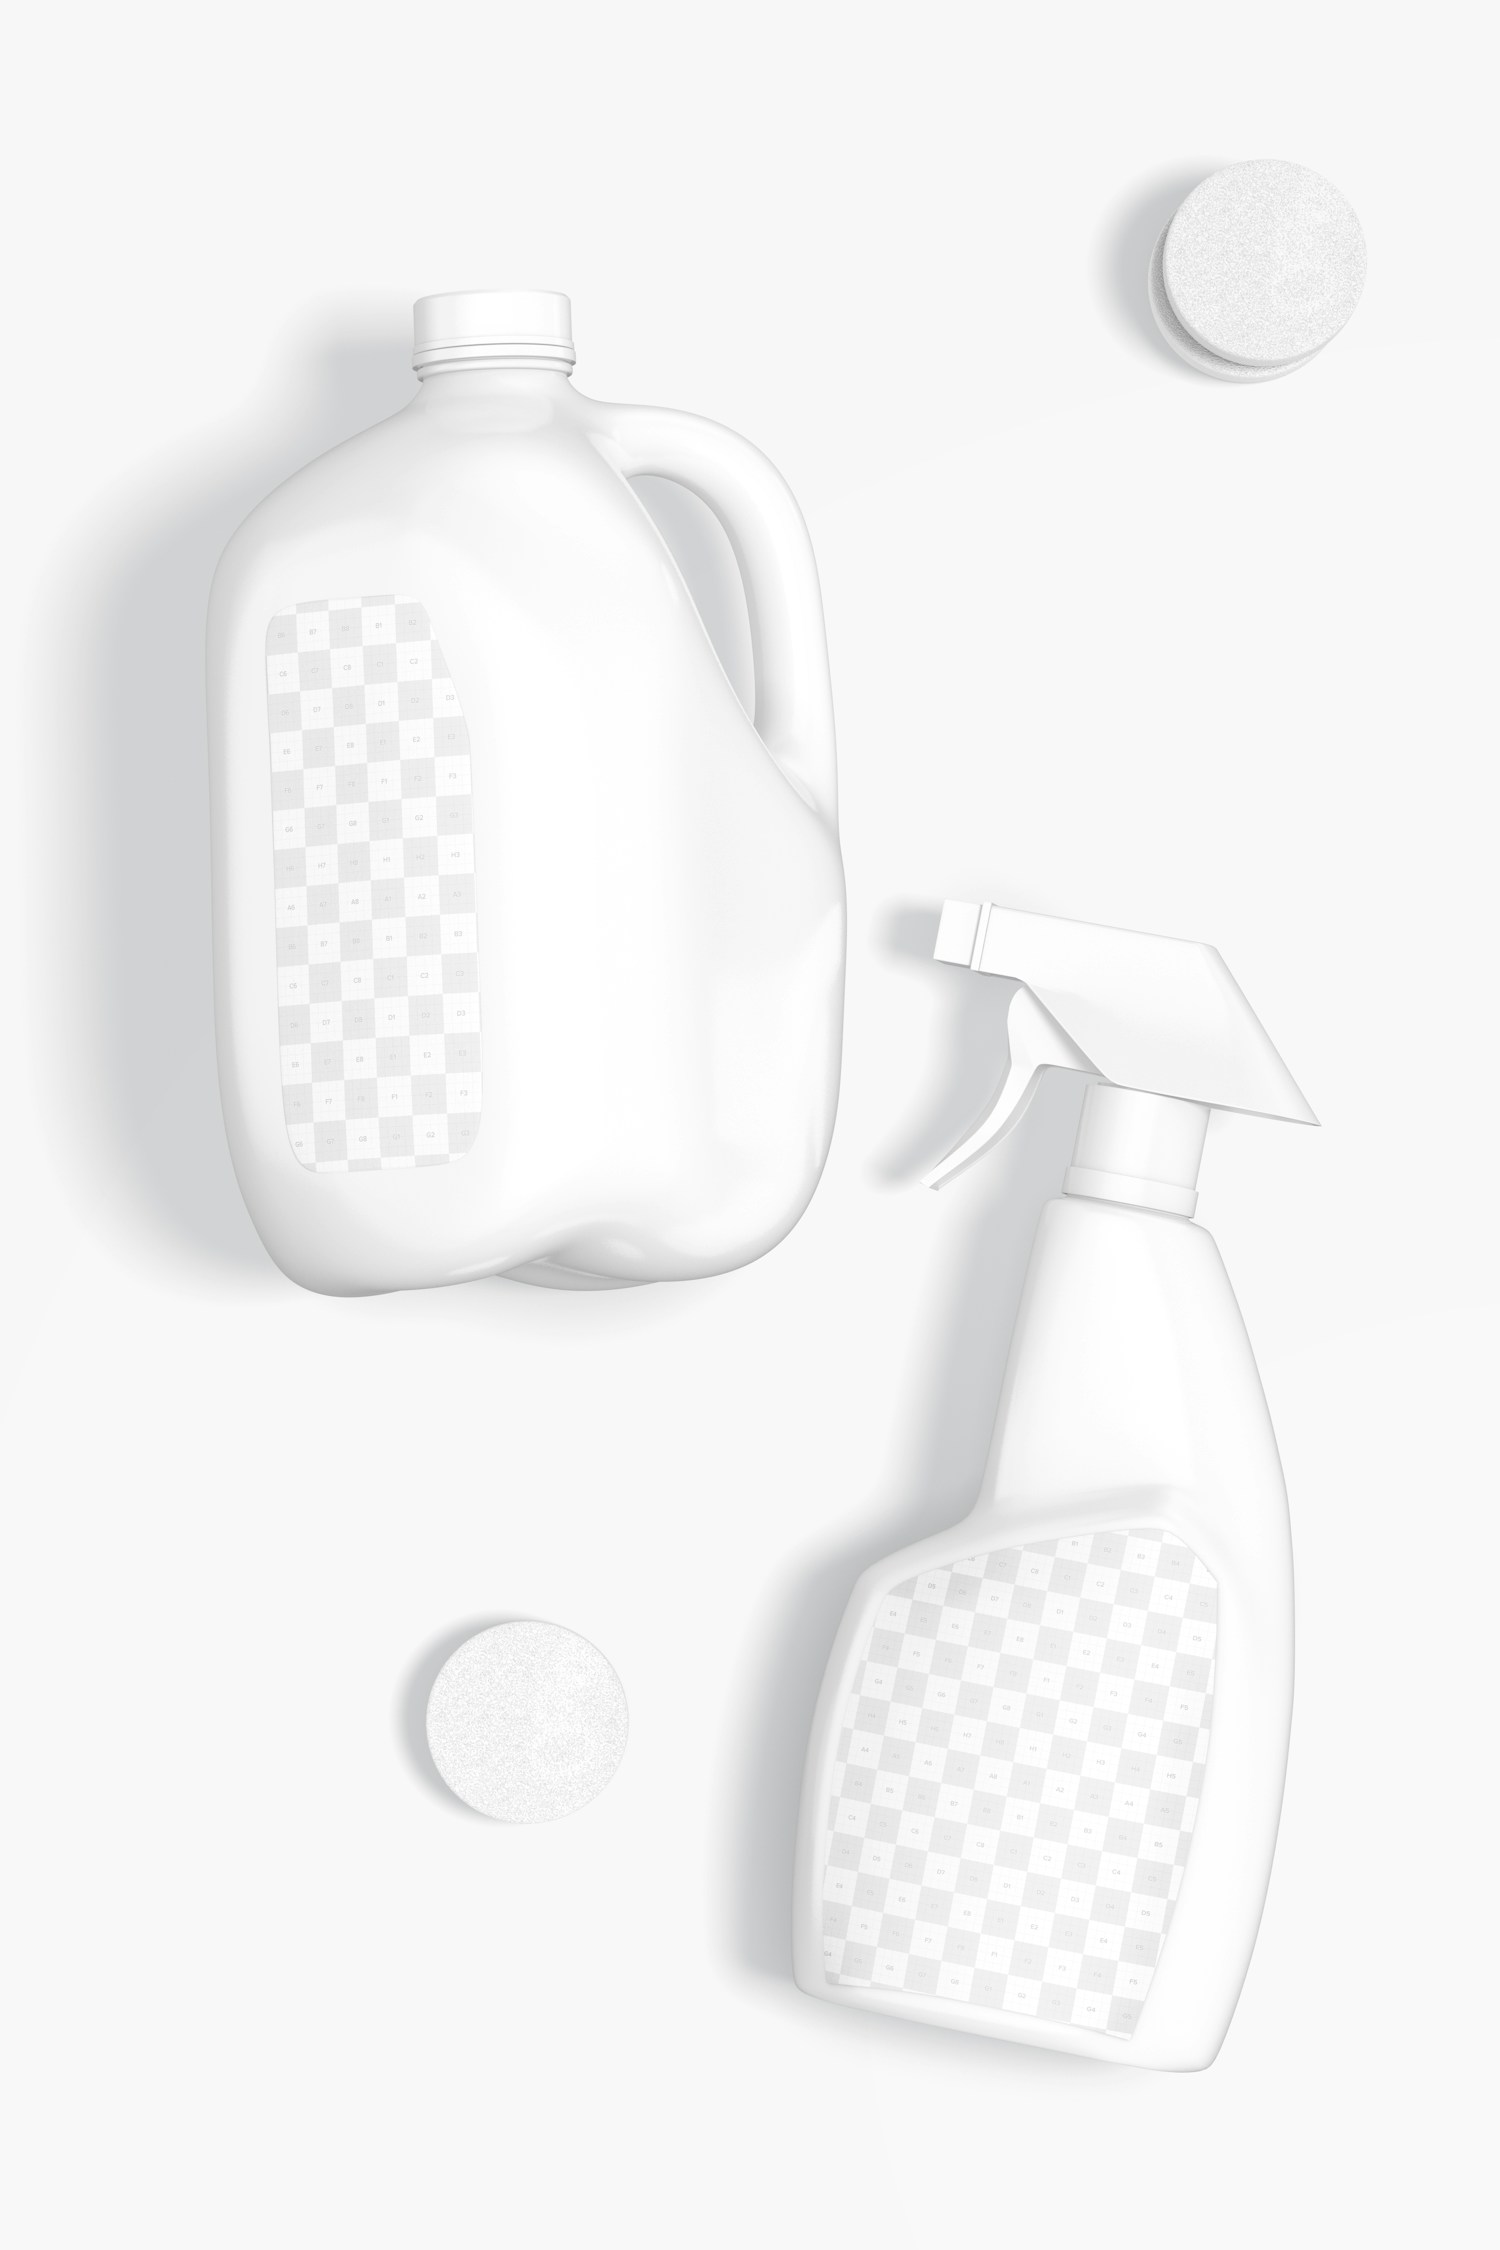 Cleaning Products Scene Mockup, Top View